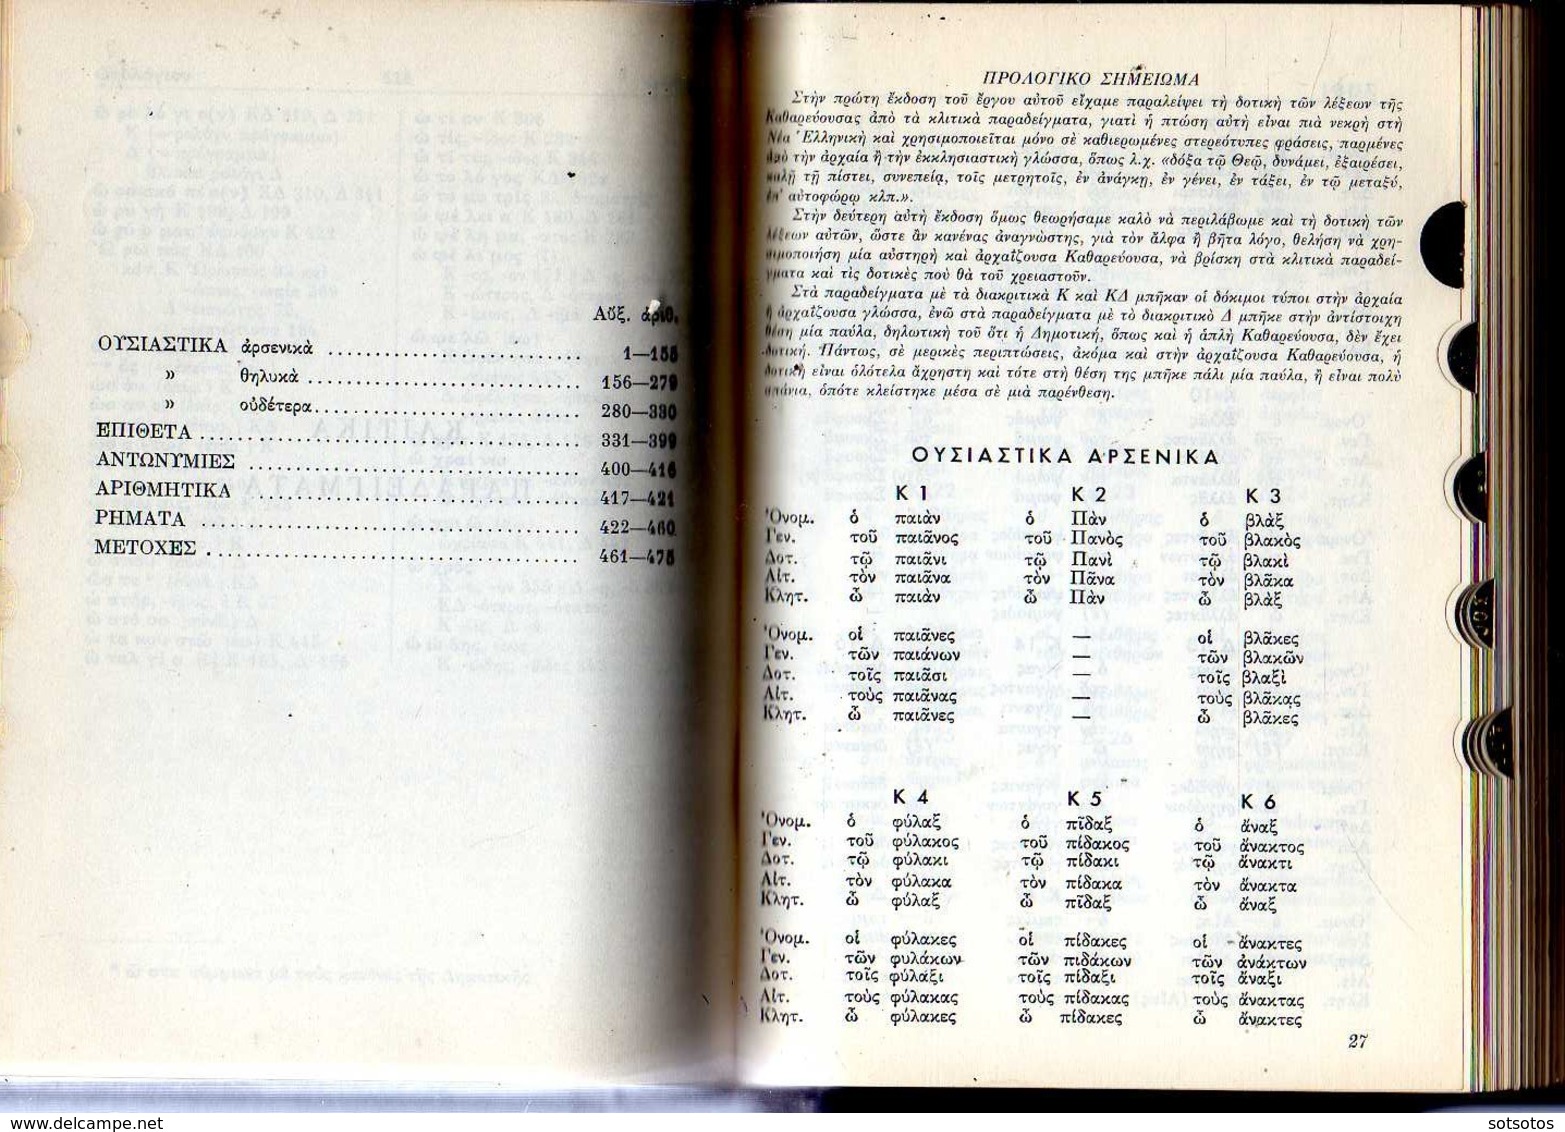 Lexicon of the Greek Orthography: Th. VOSTANTZOGLOU; Athens 1967 - with 608 pages IN GOOD CONDITION